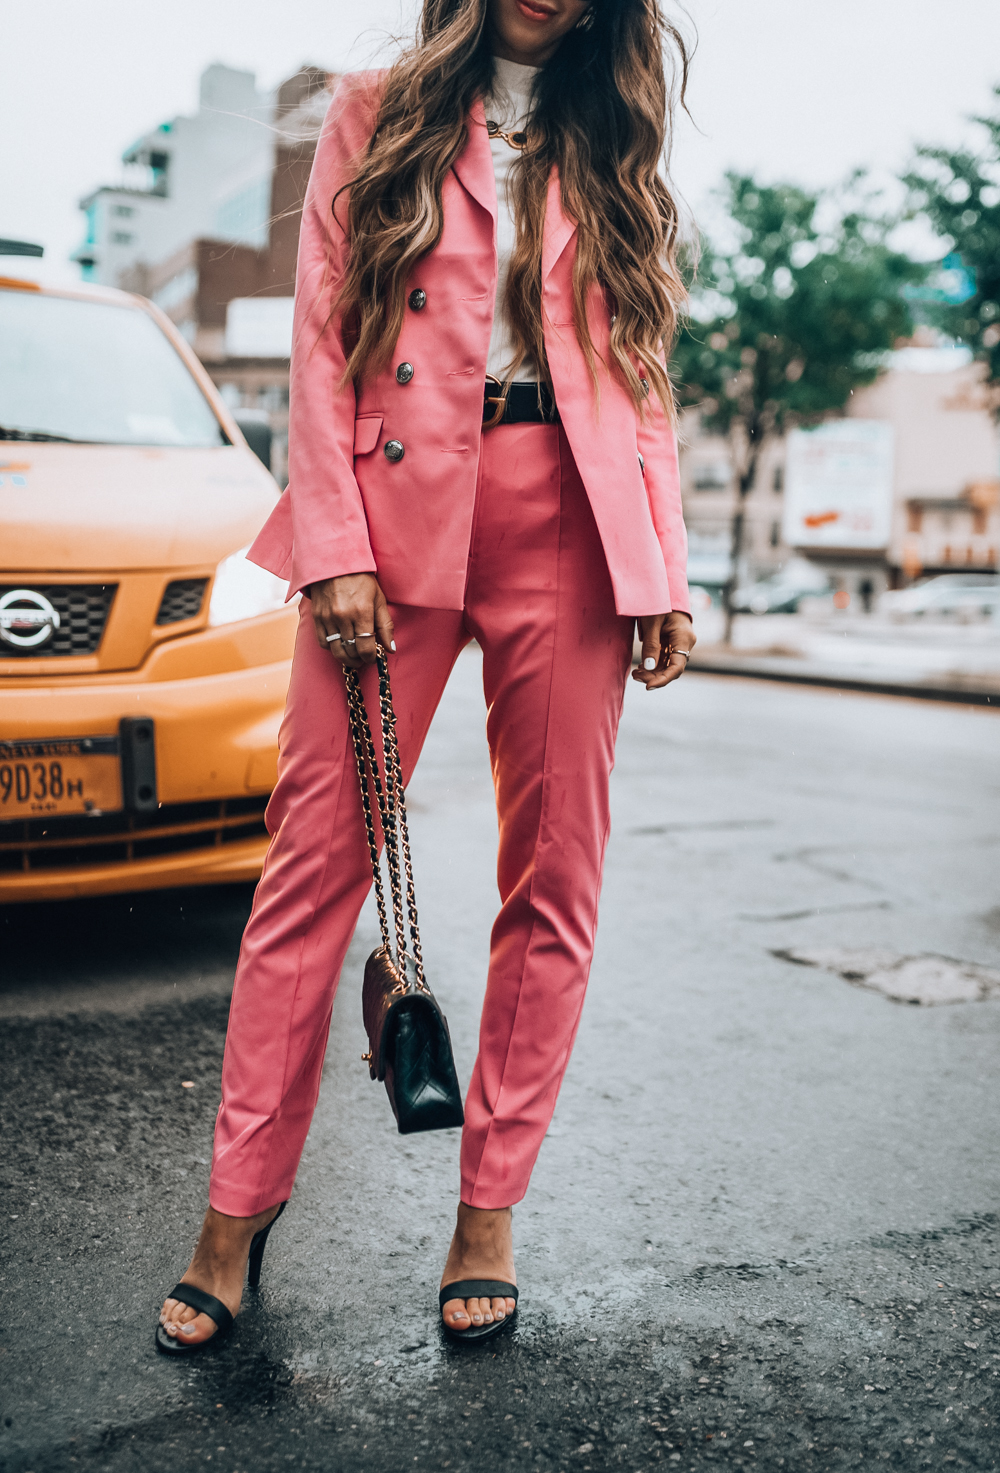 New York Fashion Week Trends: Pink | The Girl in the Yellow Dress